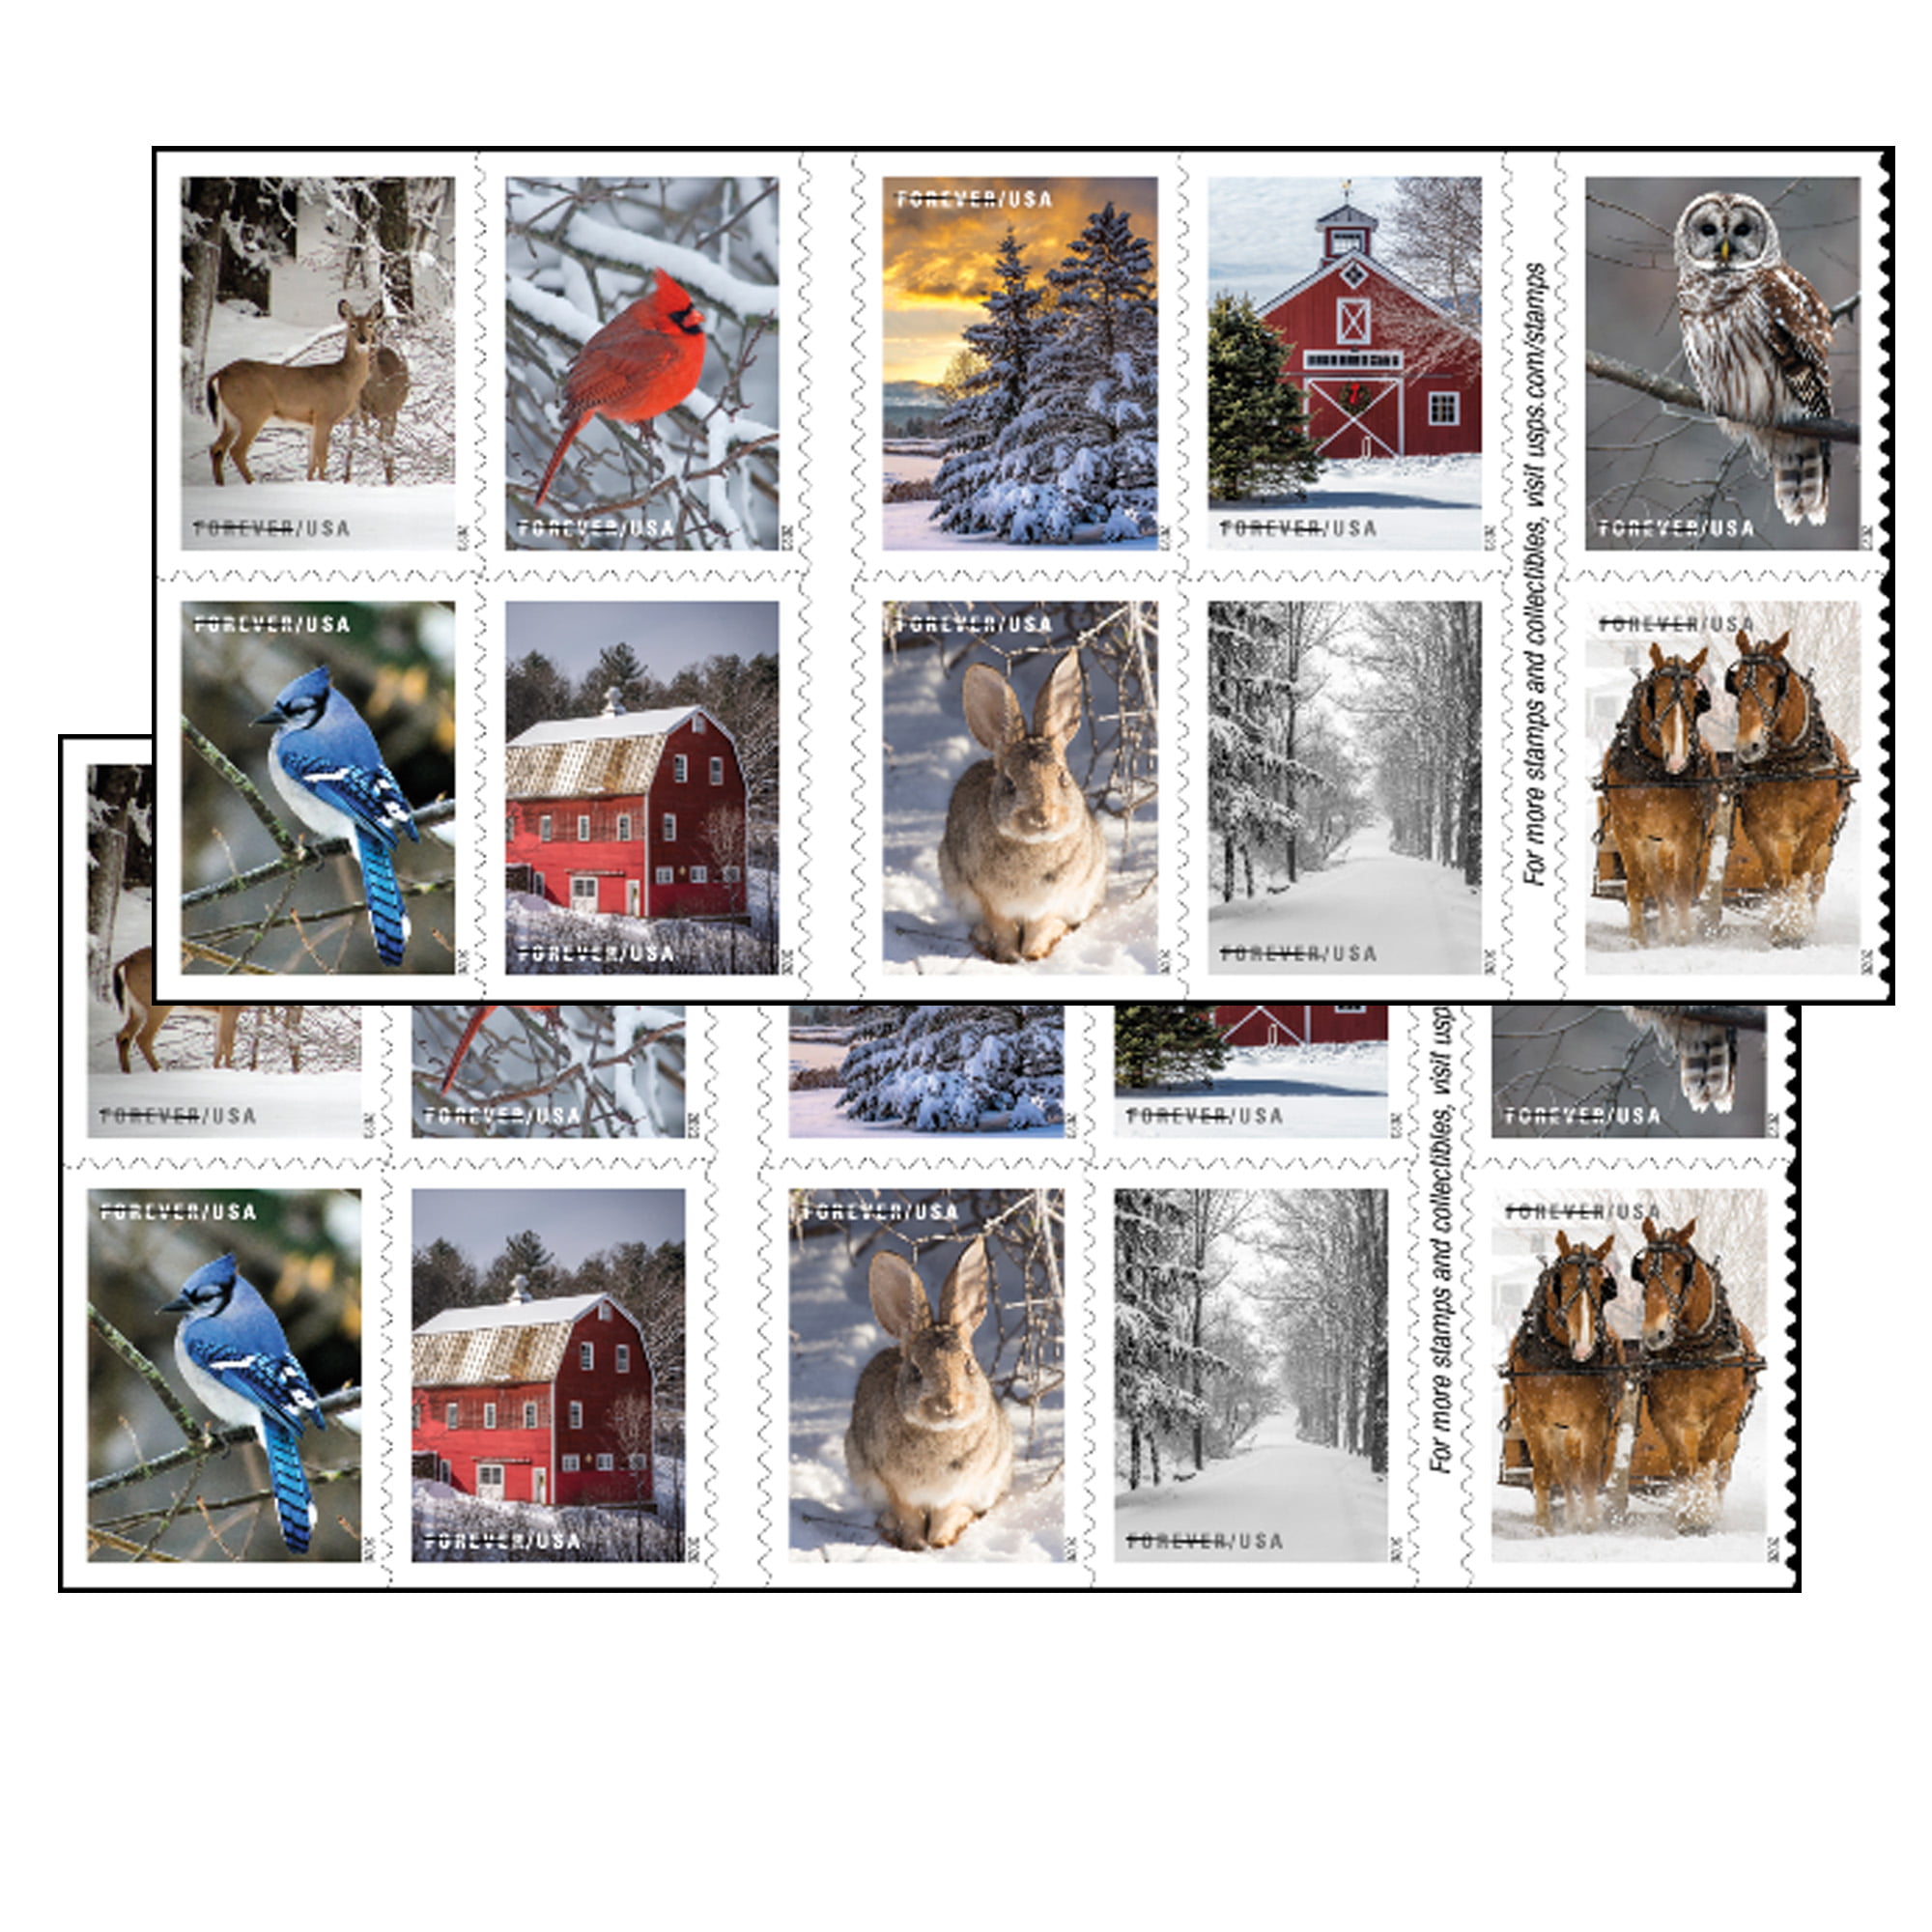 Winter Scenes USPS Forever Postage Stamps 2 Books of 20 First Class US Postal Holiday Celebrations Wedding Celebration Anniversary Traditions (40 Stamps)